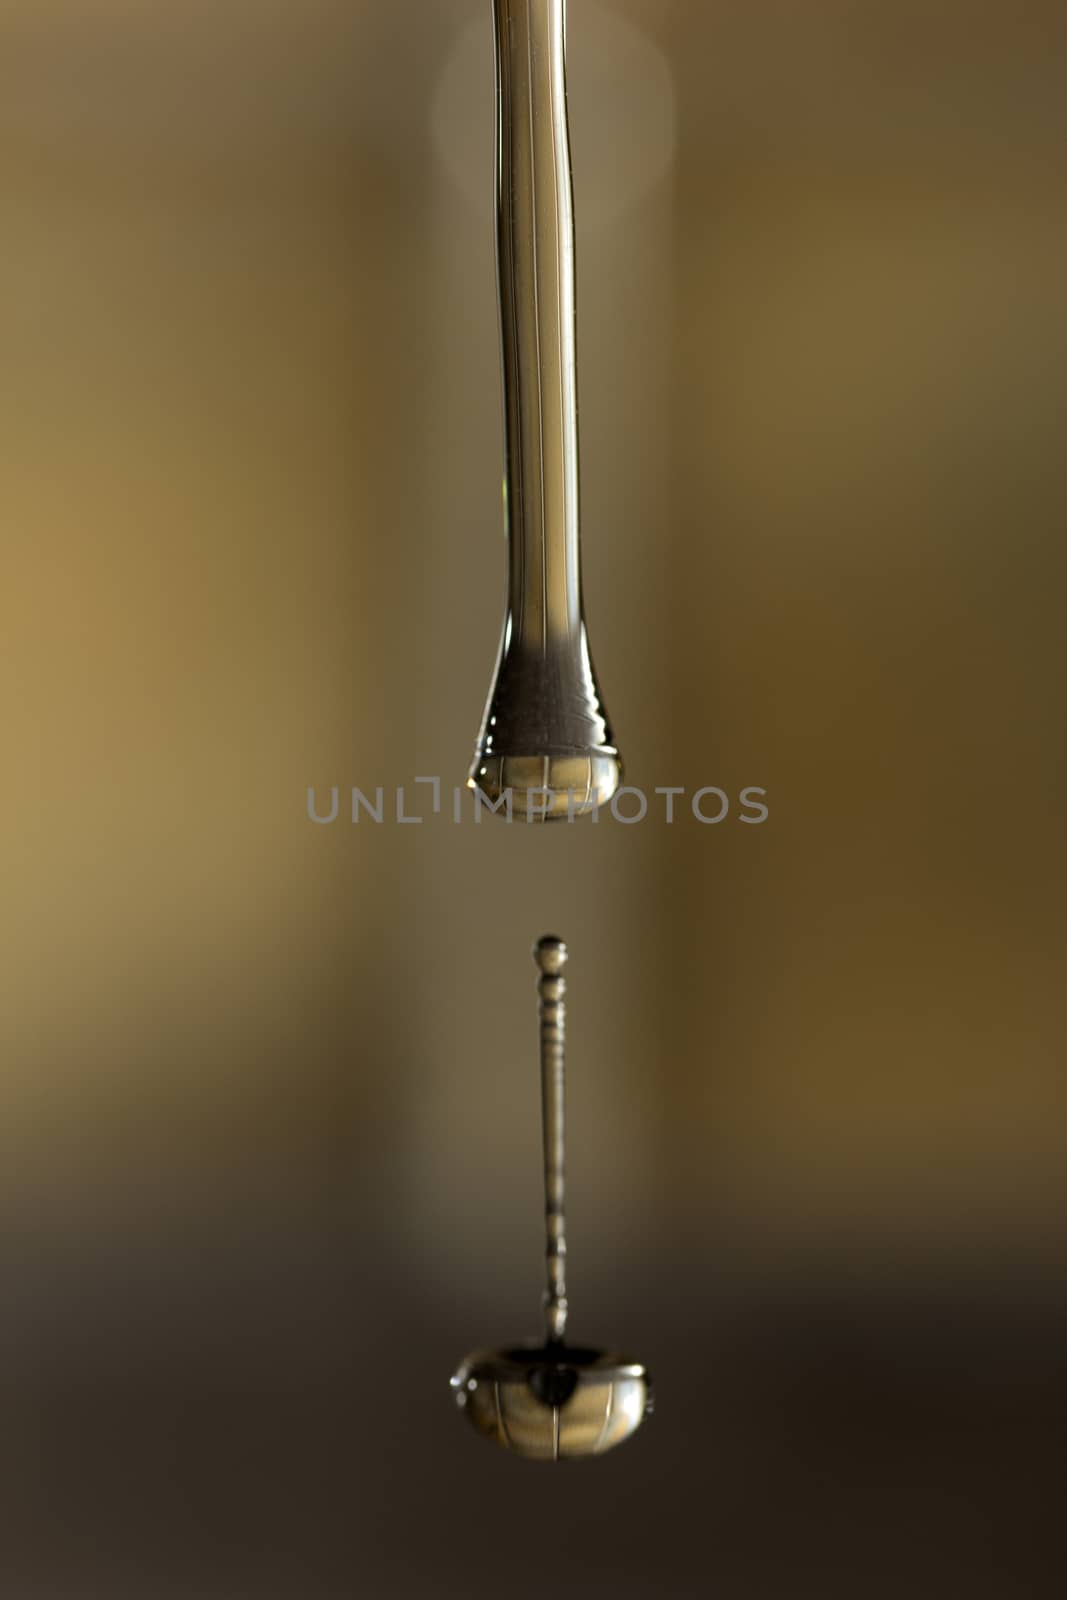 water, water drops by Tomjac1980